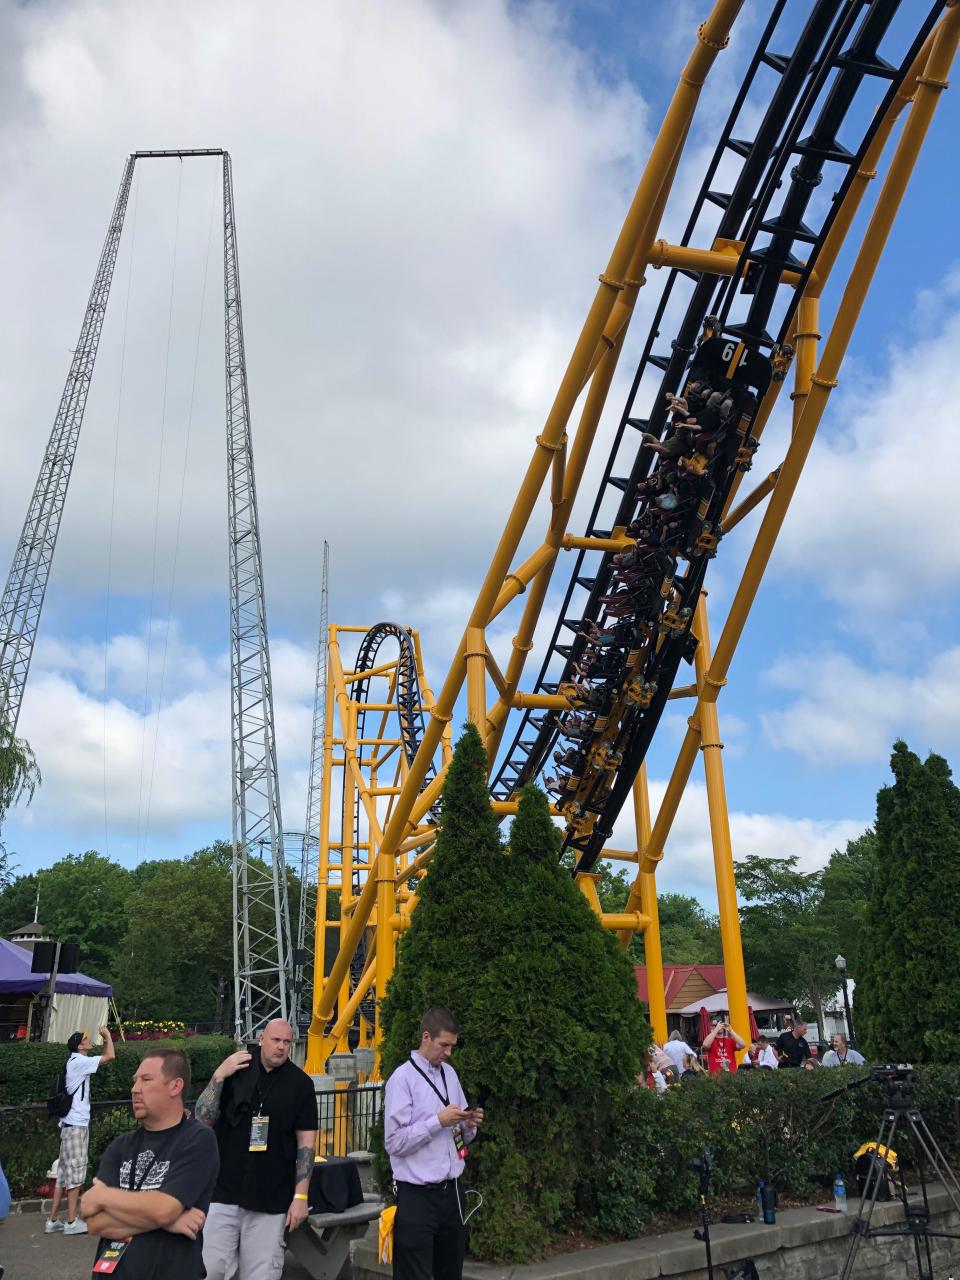 The Steel Curtain roller coaster, which crosses the Midway at Kennywood amusement park, will be closed in 2024.